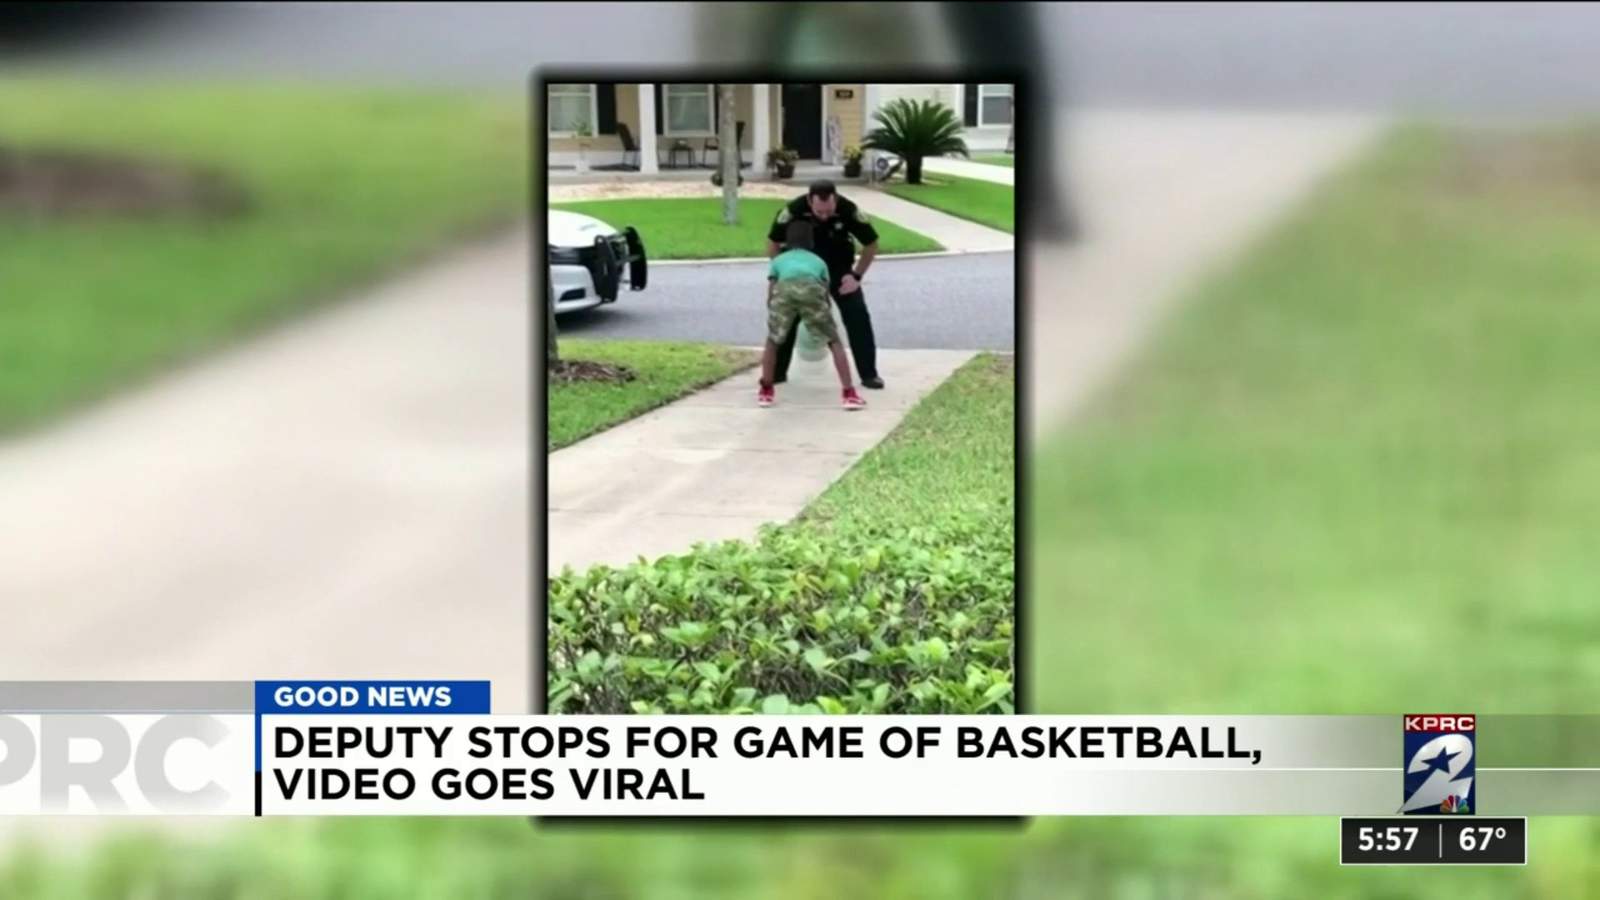 One Good Thing: Deputy stops for game of basketball with children, video goes viral